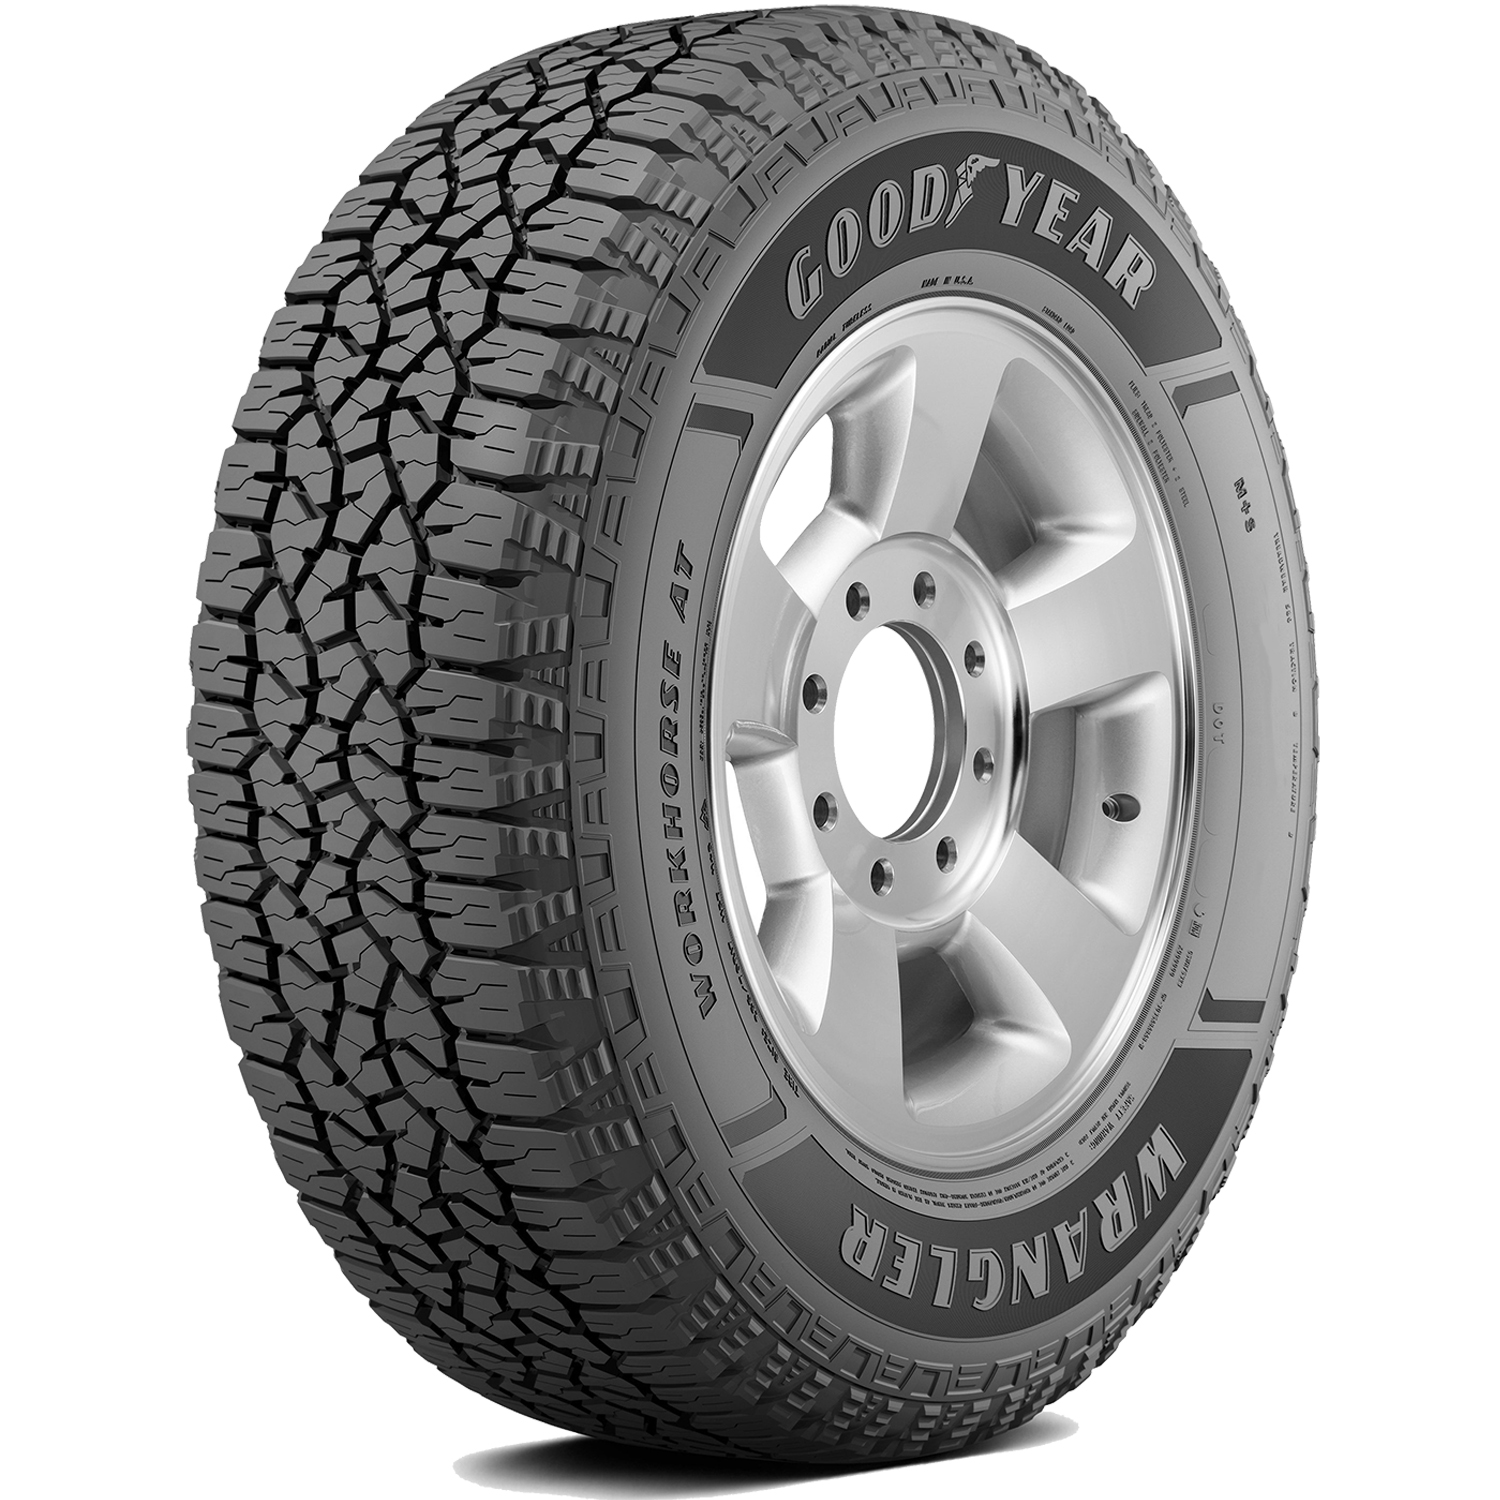 Goodyear Wrangler Workhorse AT LT 225/65R17 107/103S D (8 Ply) A/T All  Terrain Tire